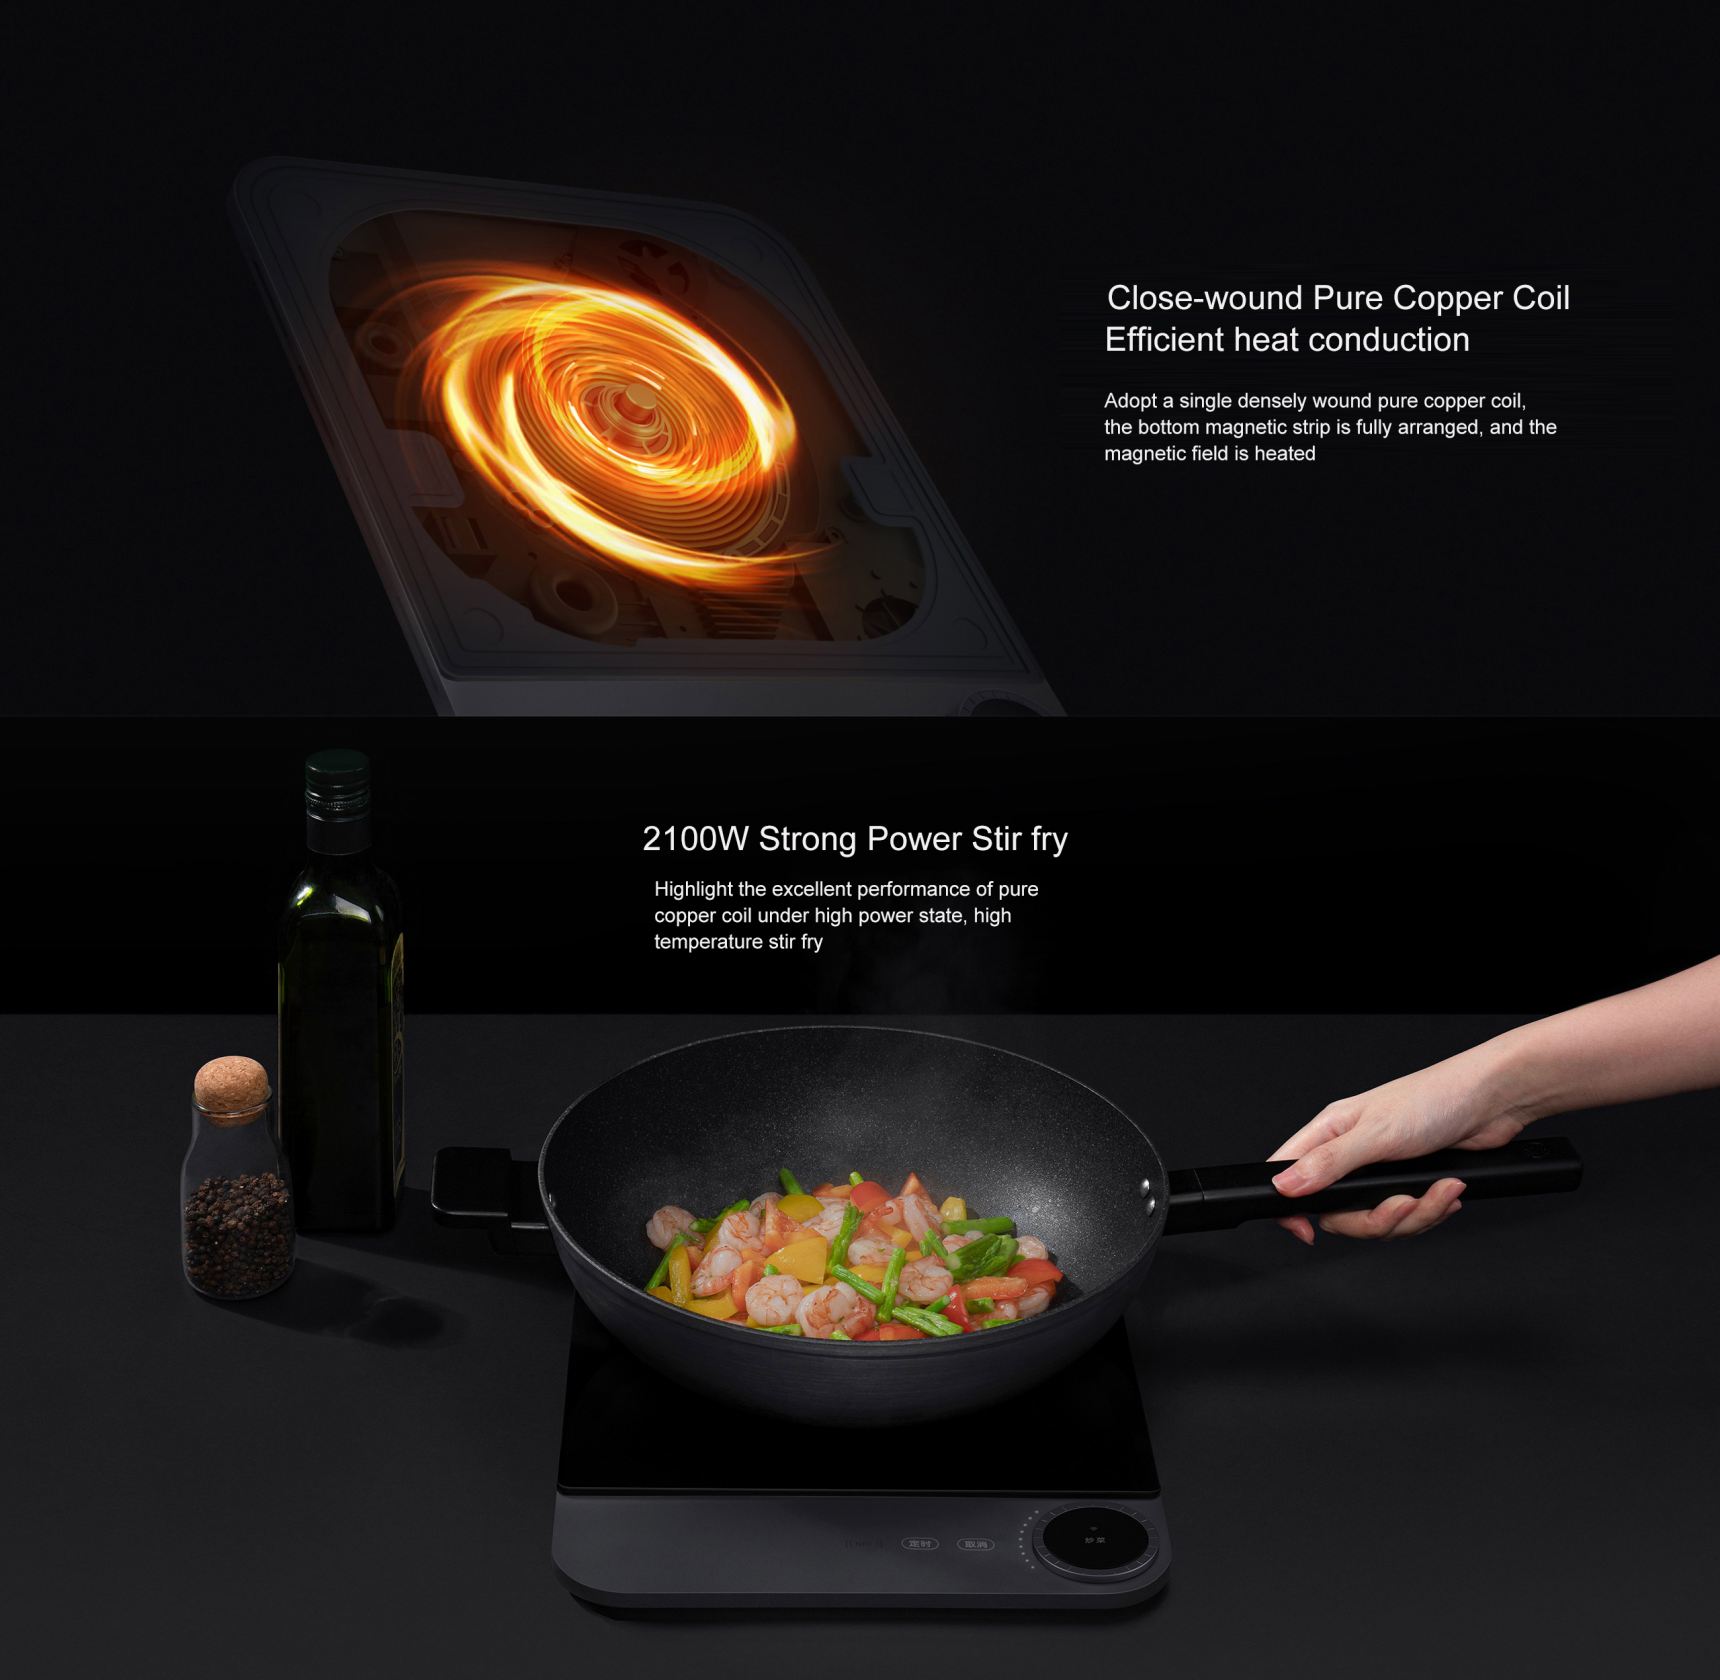 Xiaomi Mijia Ultra-thin Induction Cooker 2100W High Power 100W Low Power Heat Continuous OLED Knob 99 gears Adjustable Heating